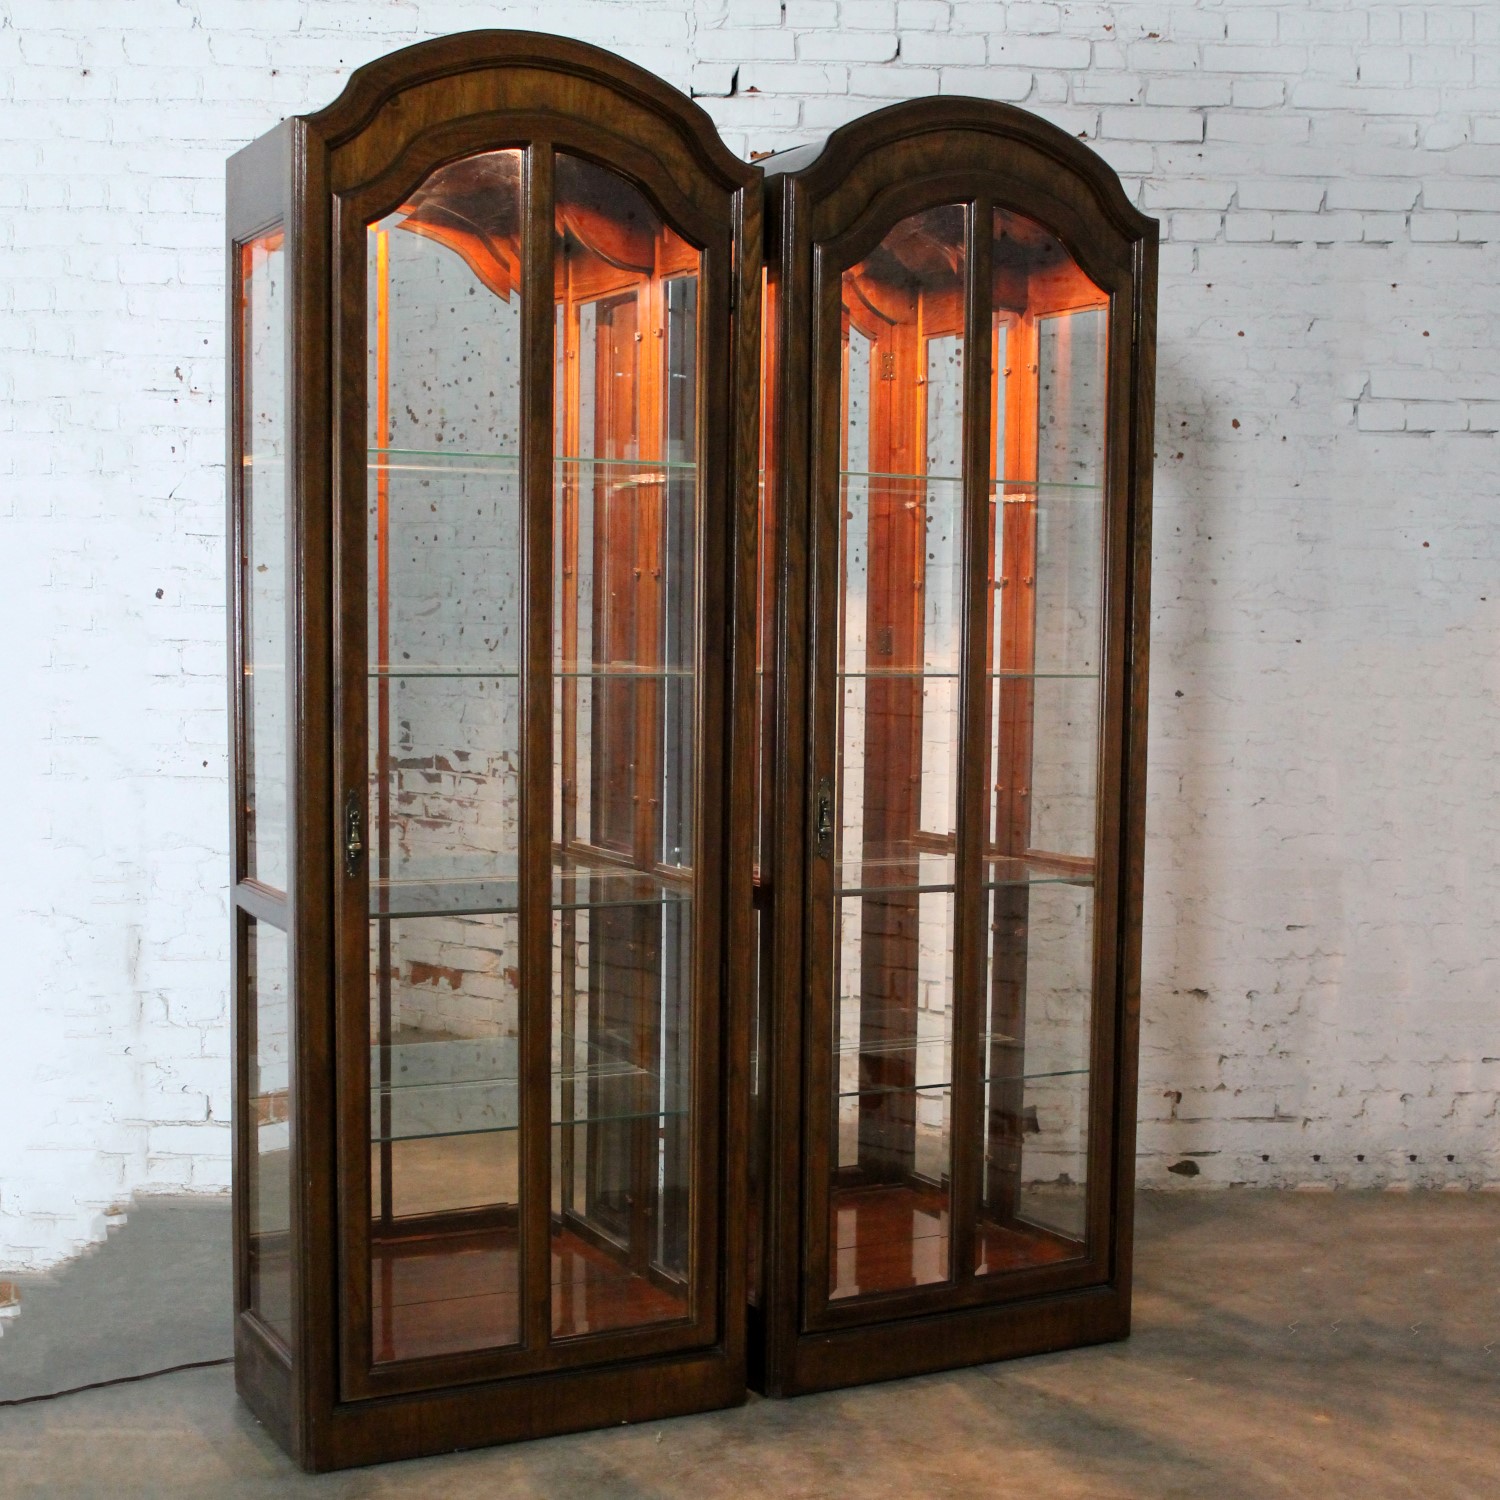 Lighted Curio Cabinets with Arched Top in Dark Wood a Vintage Pair